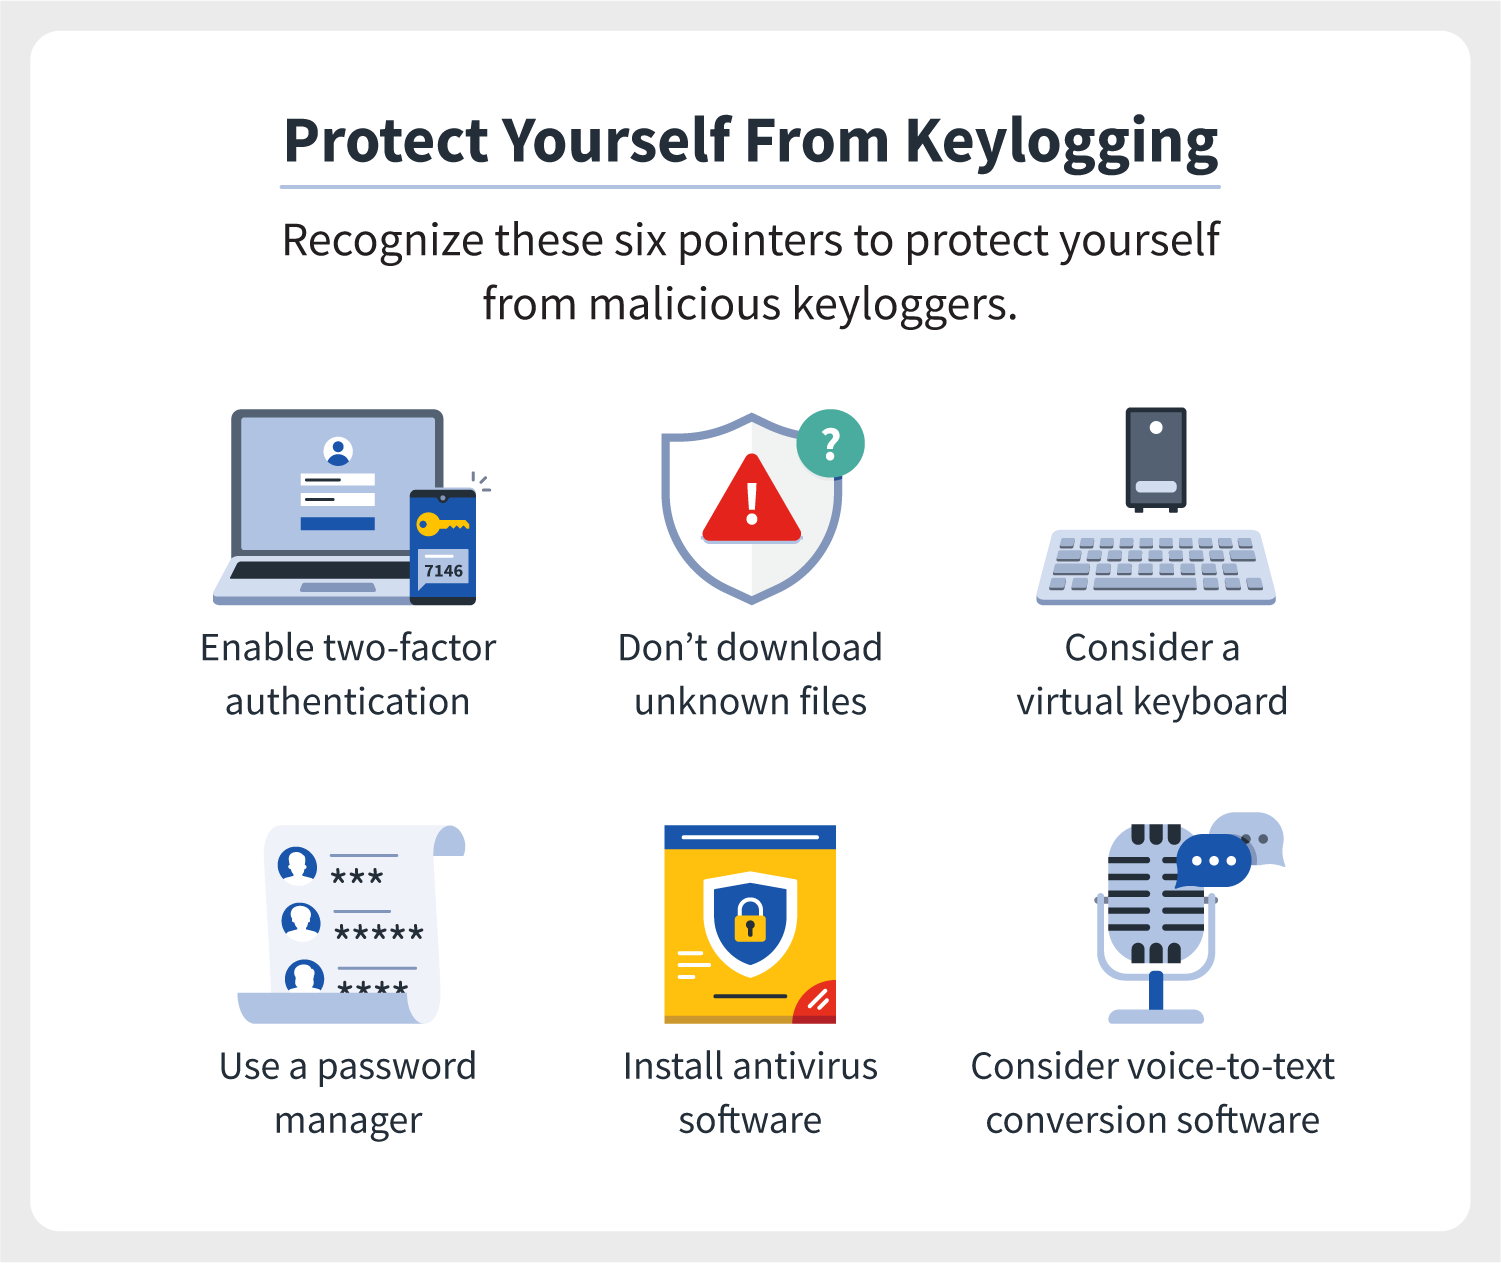 Six images accompany six ways people can protect their devices from malicious keylogger attacks.